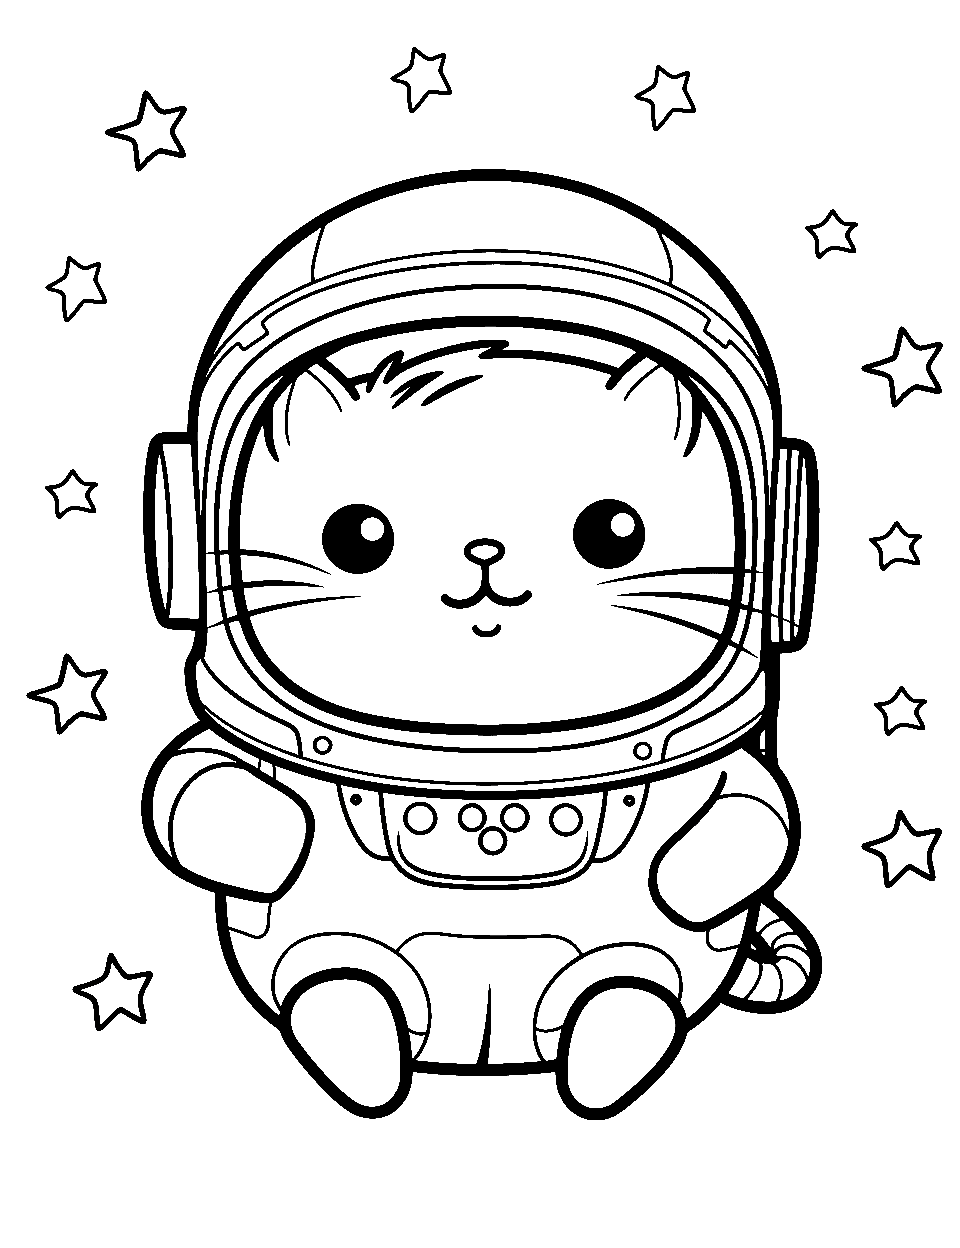 Space Adventures Coloring Page - Pusheen in an astronaut helmet, floating in space.